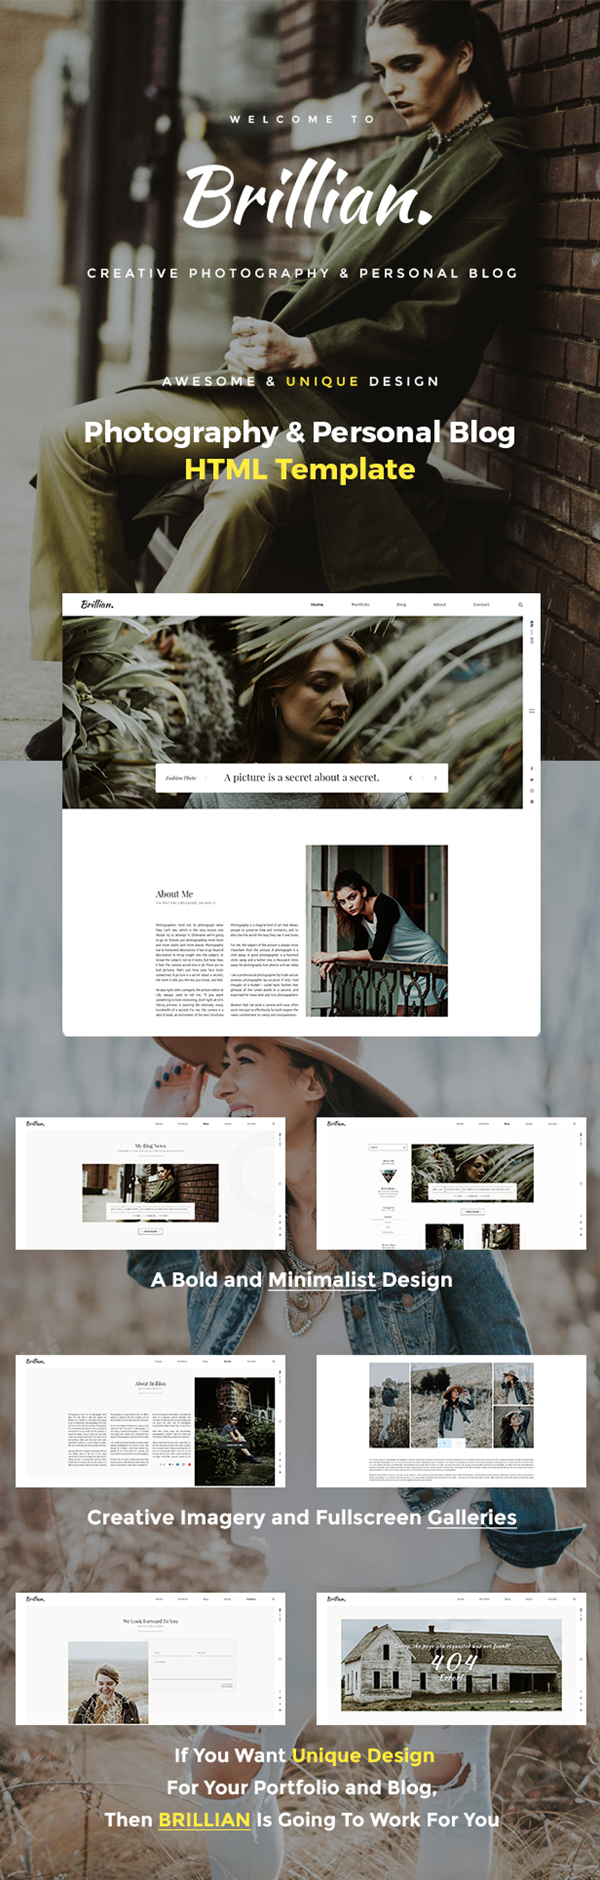 BRILLIAN - Photography, Personal, Blog HTML Template - 4